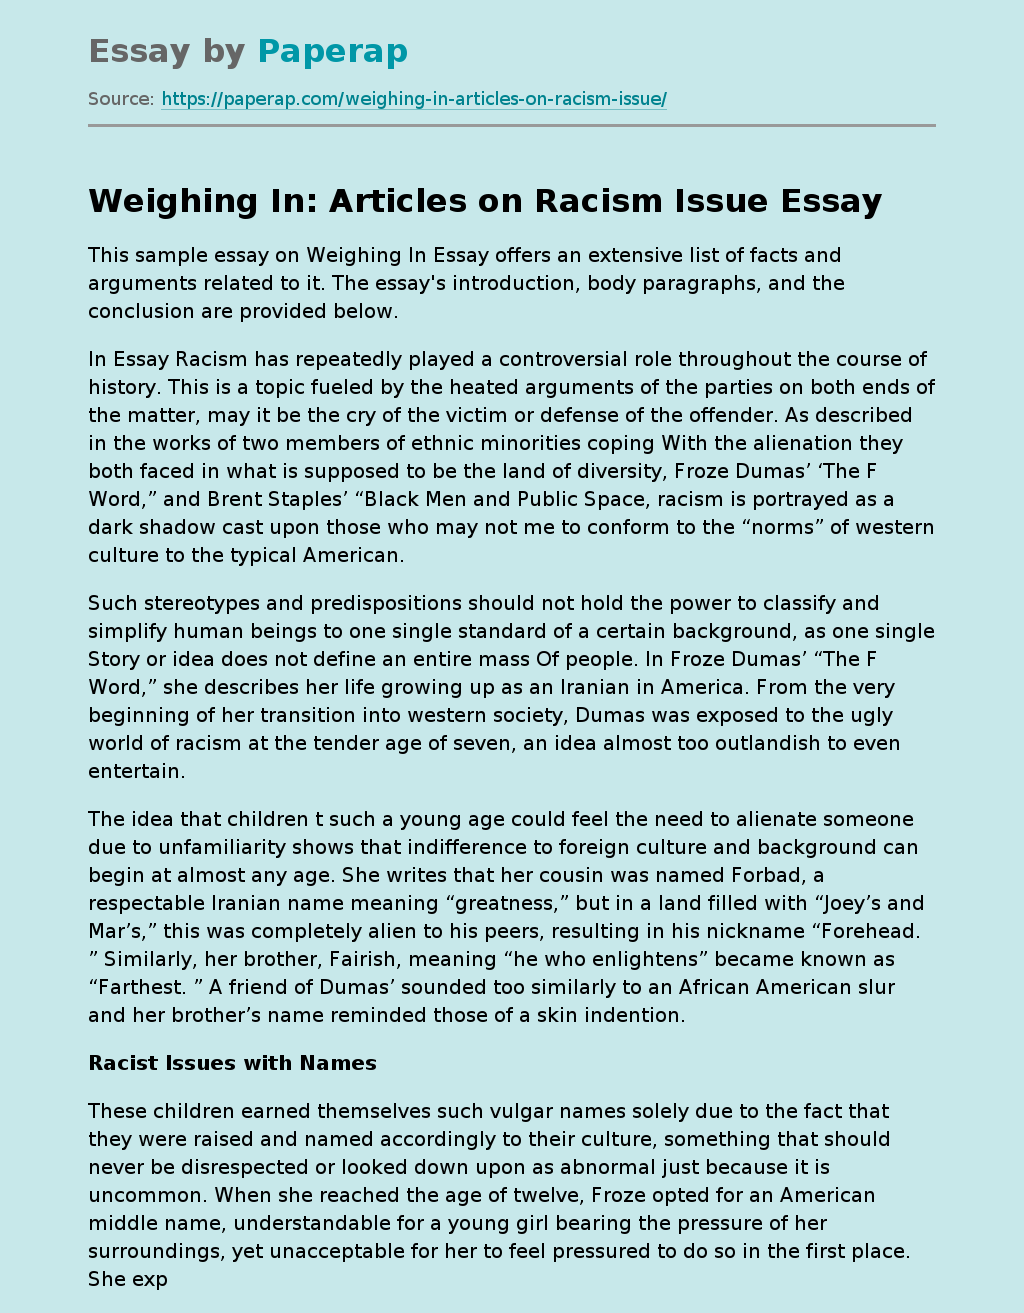 Weighing In: Articles on Racism Issue